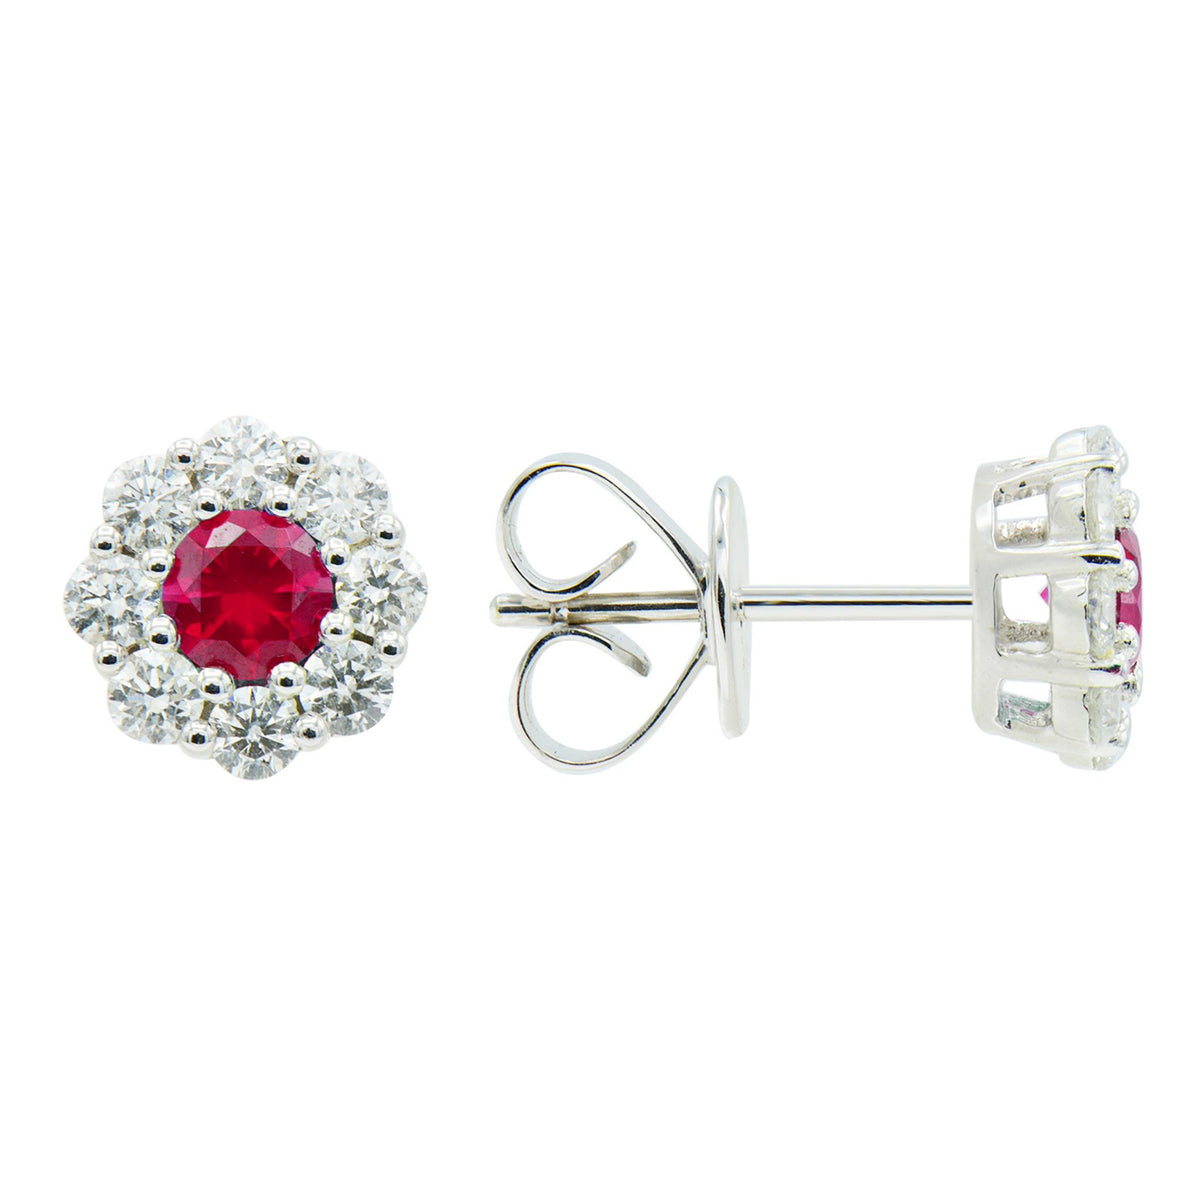 14Kt White Gold Halo Earrings Gemstone Earrings With 0.45ct Rubies